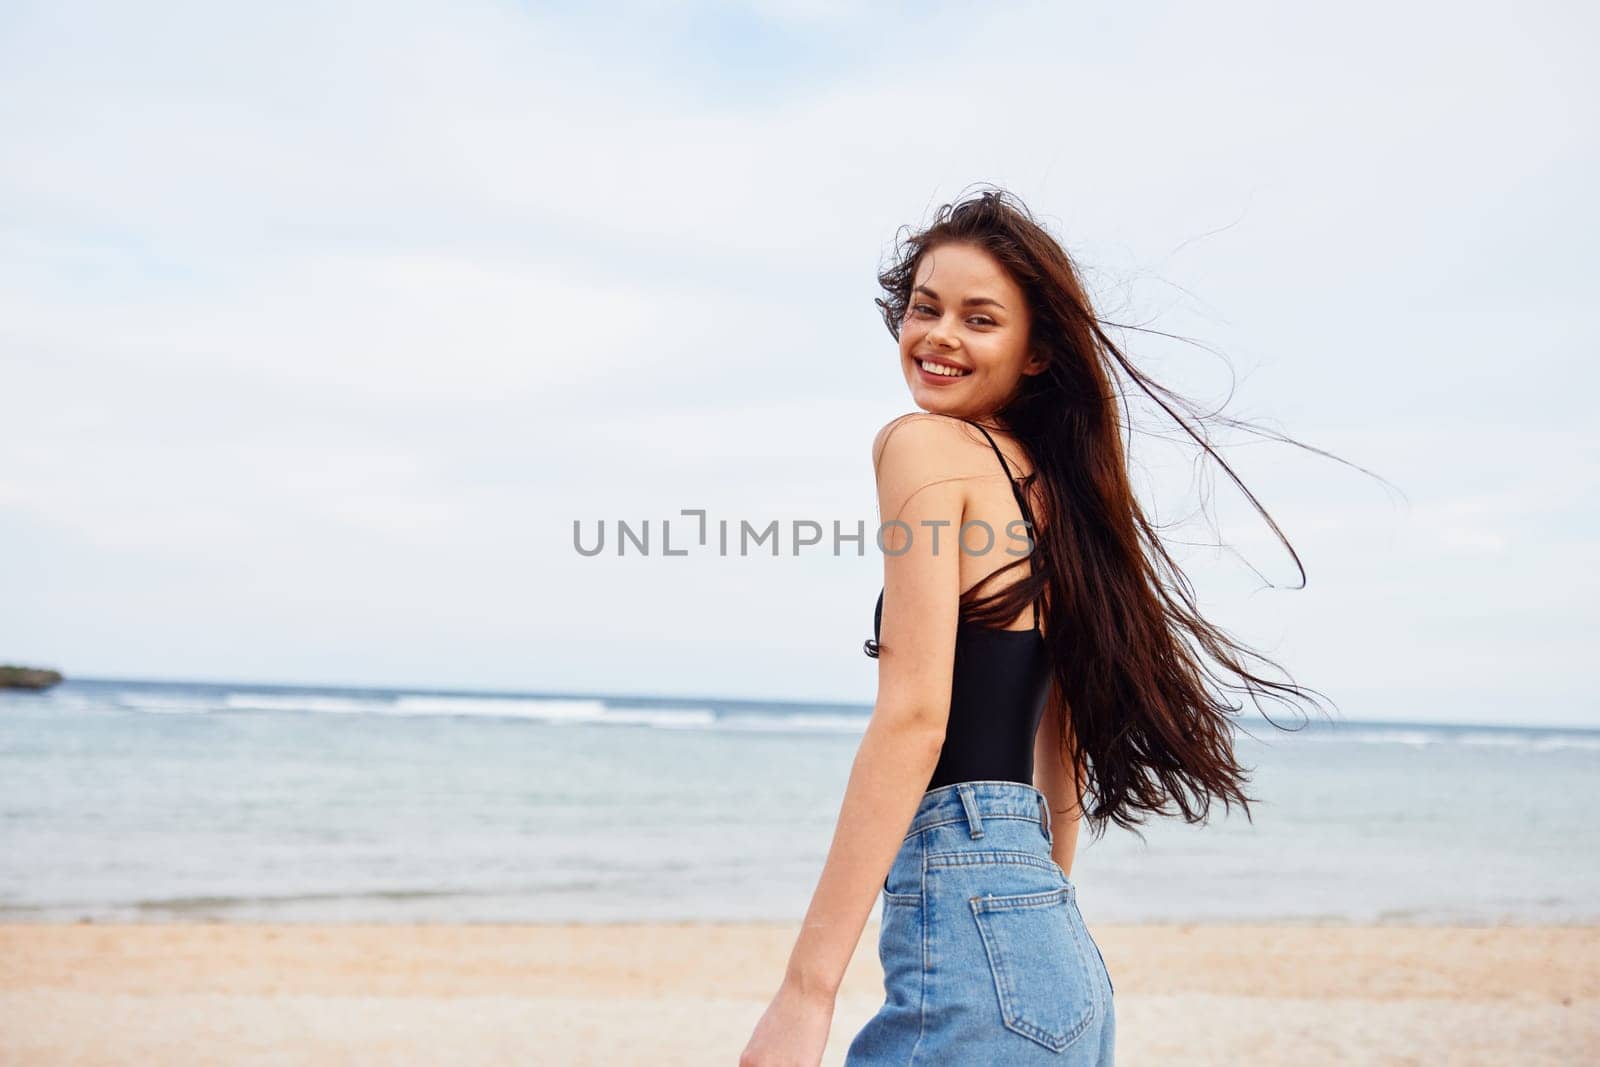 woman sky coast sea ocean summer outdoor young copy-space beach water sun vacation lifestyle sand running smile long hair nature enjoyment tropical